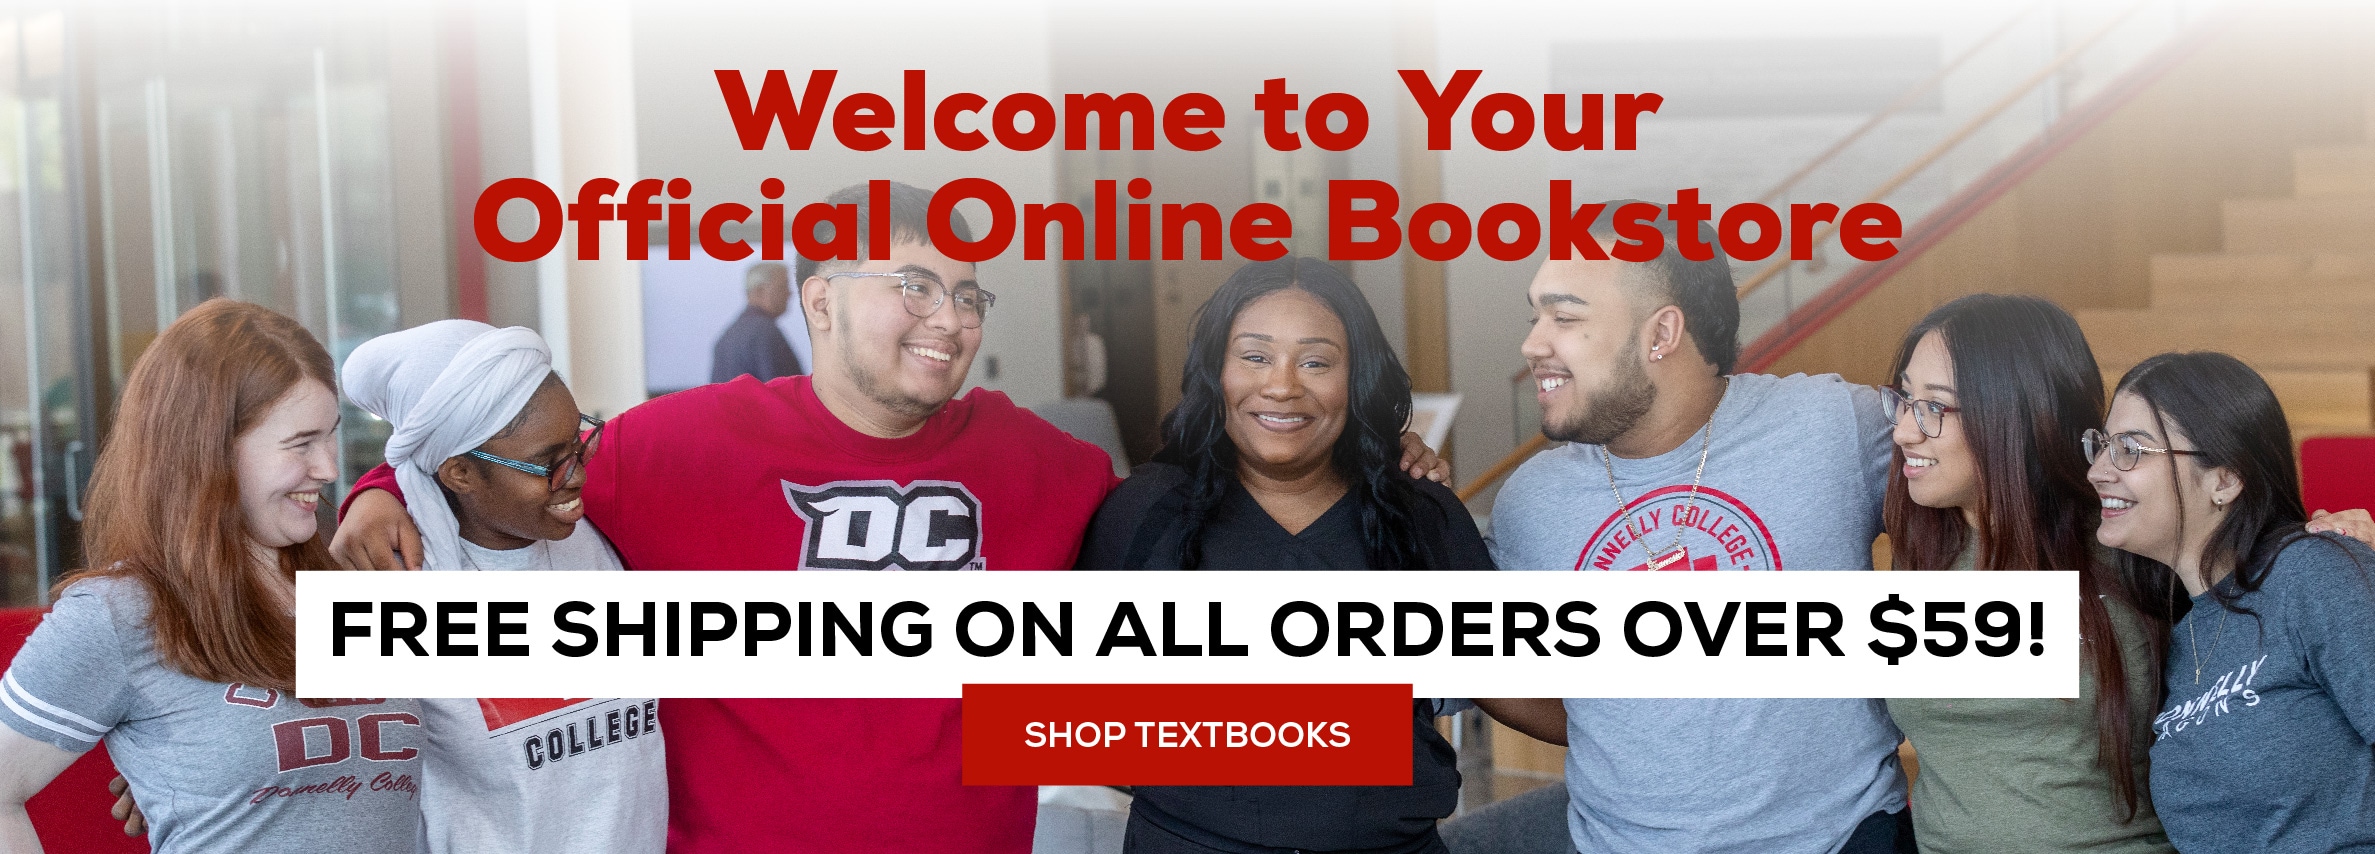 Welcome to your official online bookstore. Free shipping on all orders over $59!